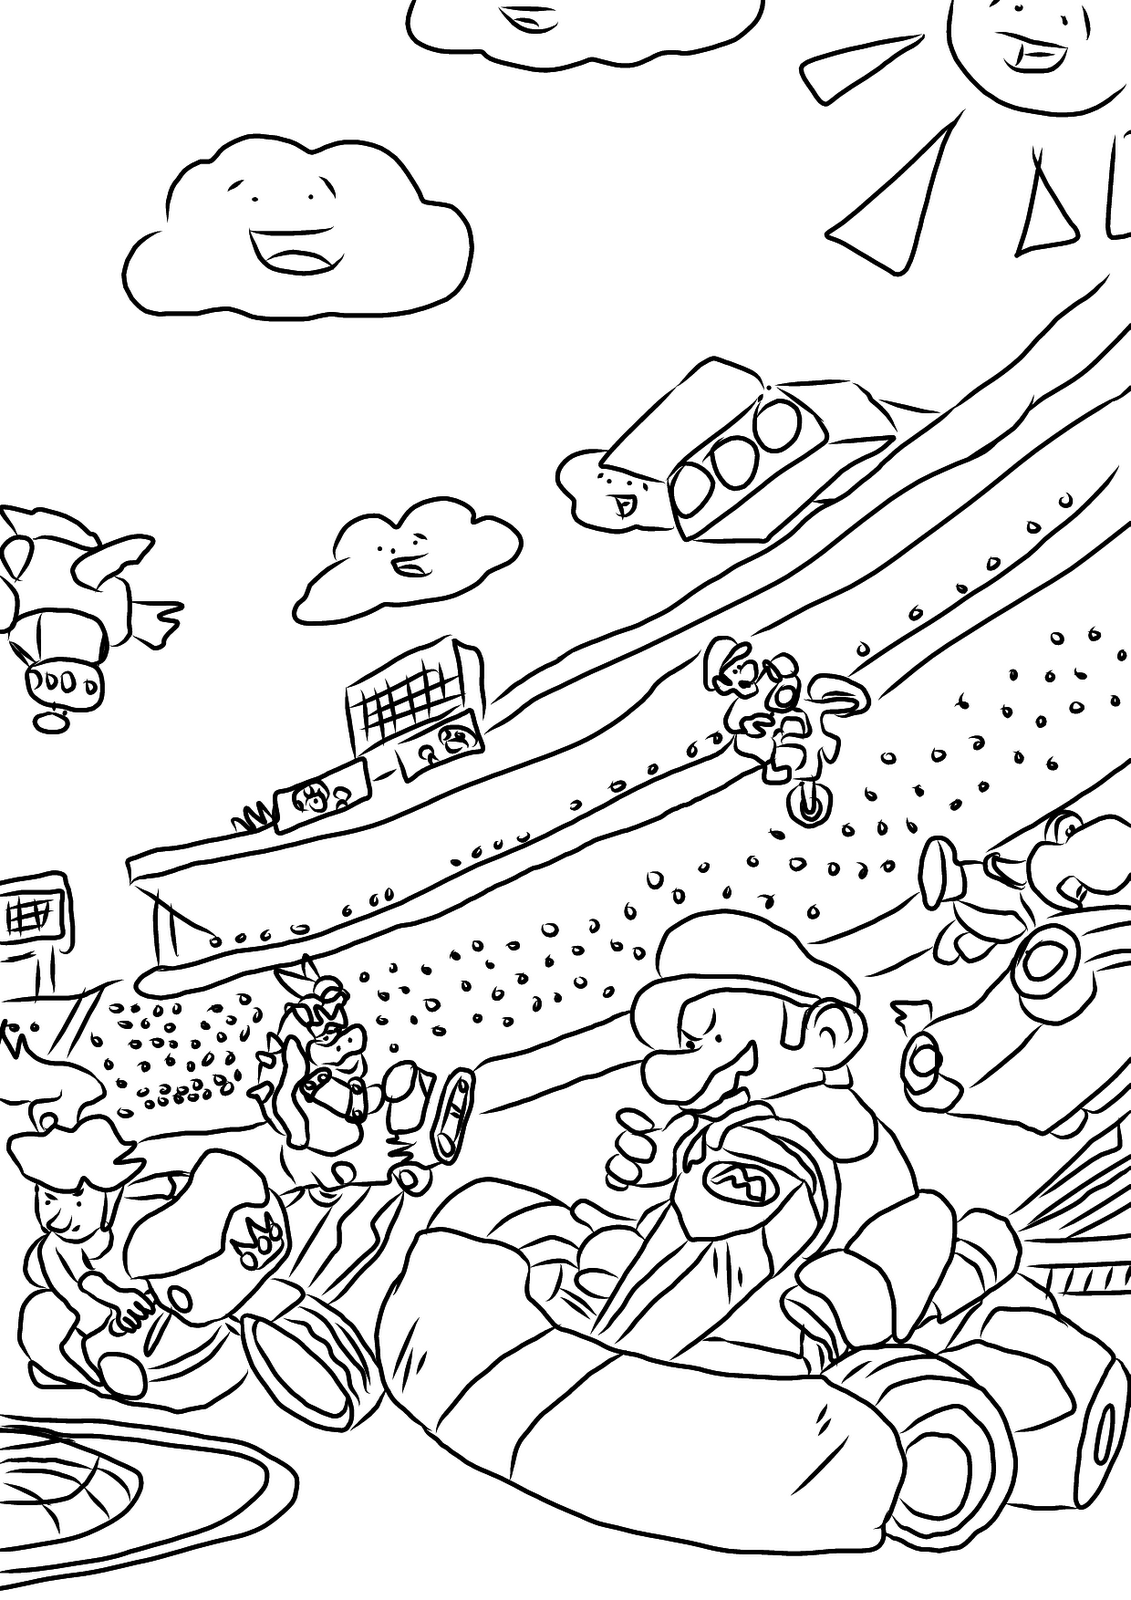 Mario Kart 8 Coloring Pages - Coloring Home